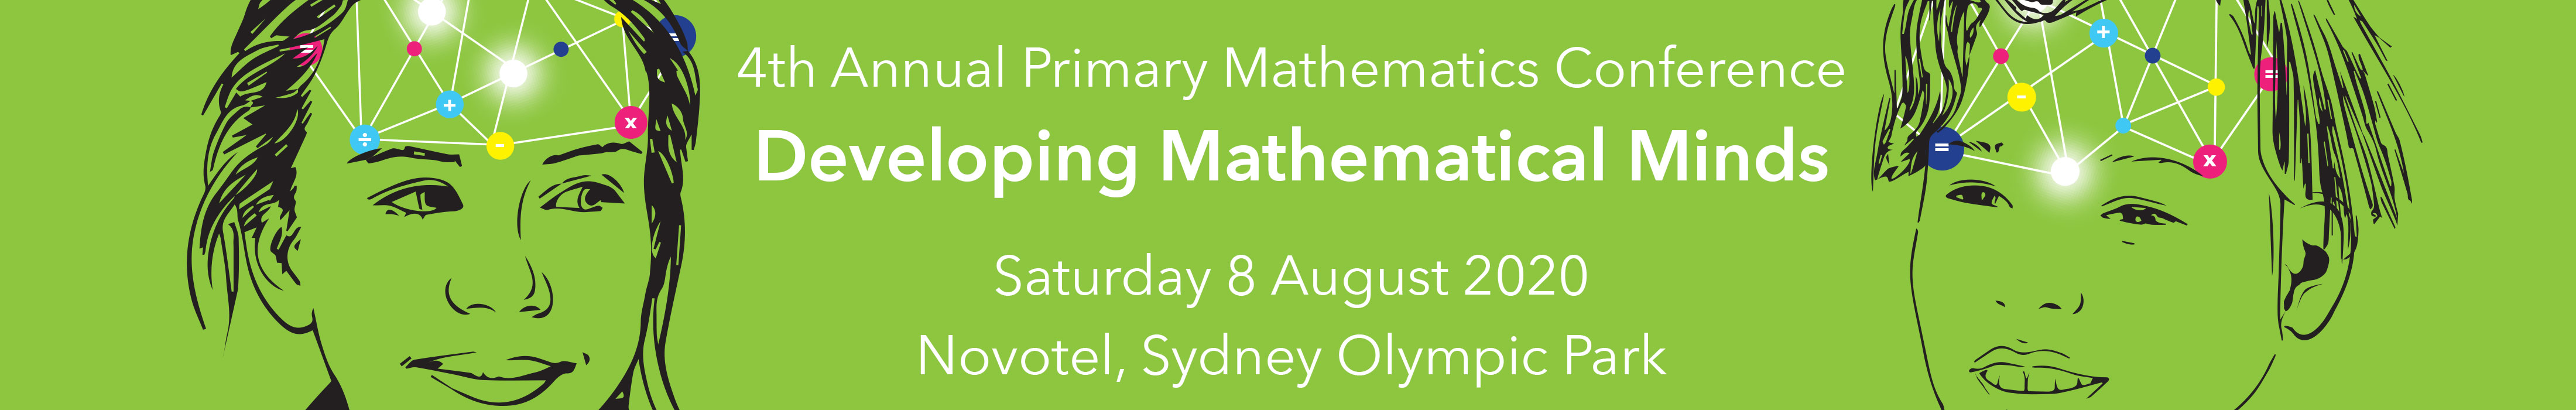 4th Annual Primary Mathematics Conference | Developing Mathematical Minds | Saturday 8 August 2020 | Novotel, Sydney Olympic Park